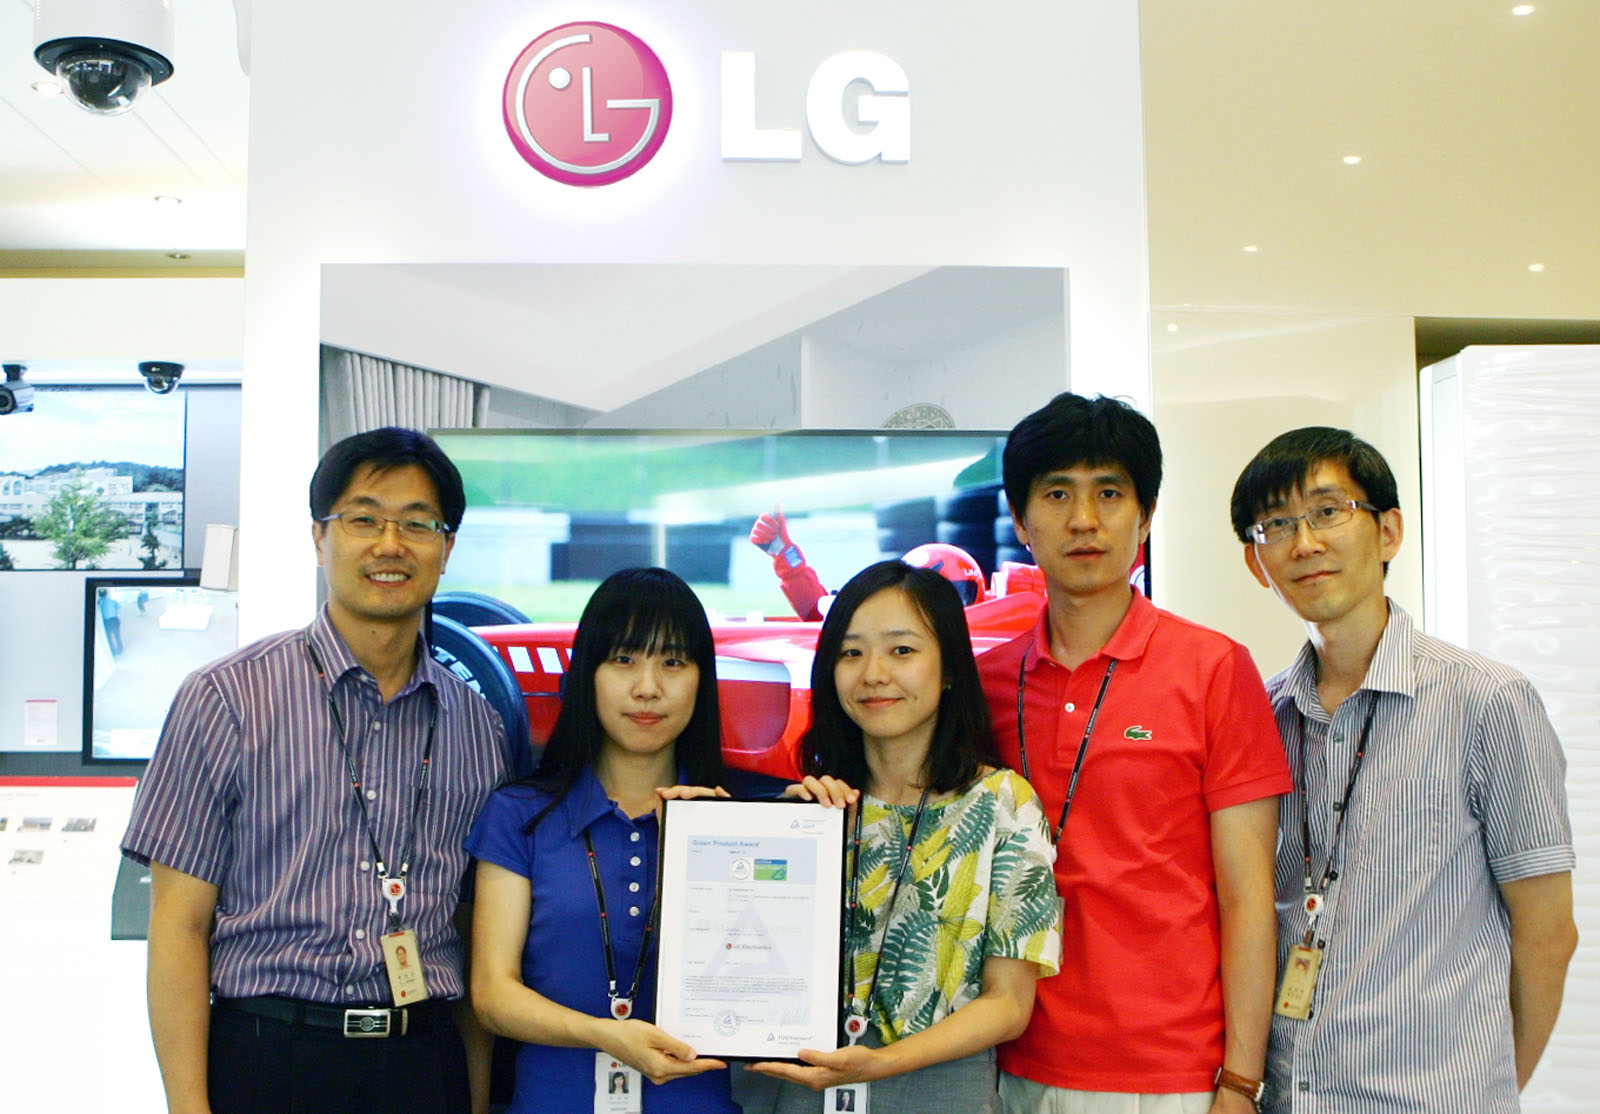 LG employees presenting the Green Mark certificate from TÜV Rheinland for the LG CINEMA 3D TV model 47LM7600